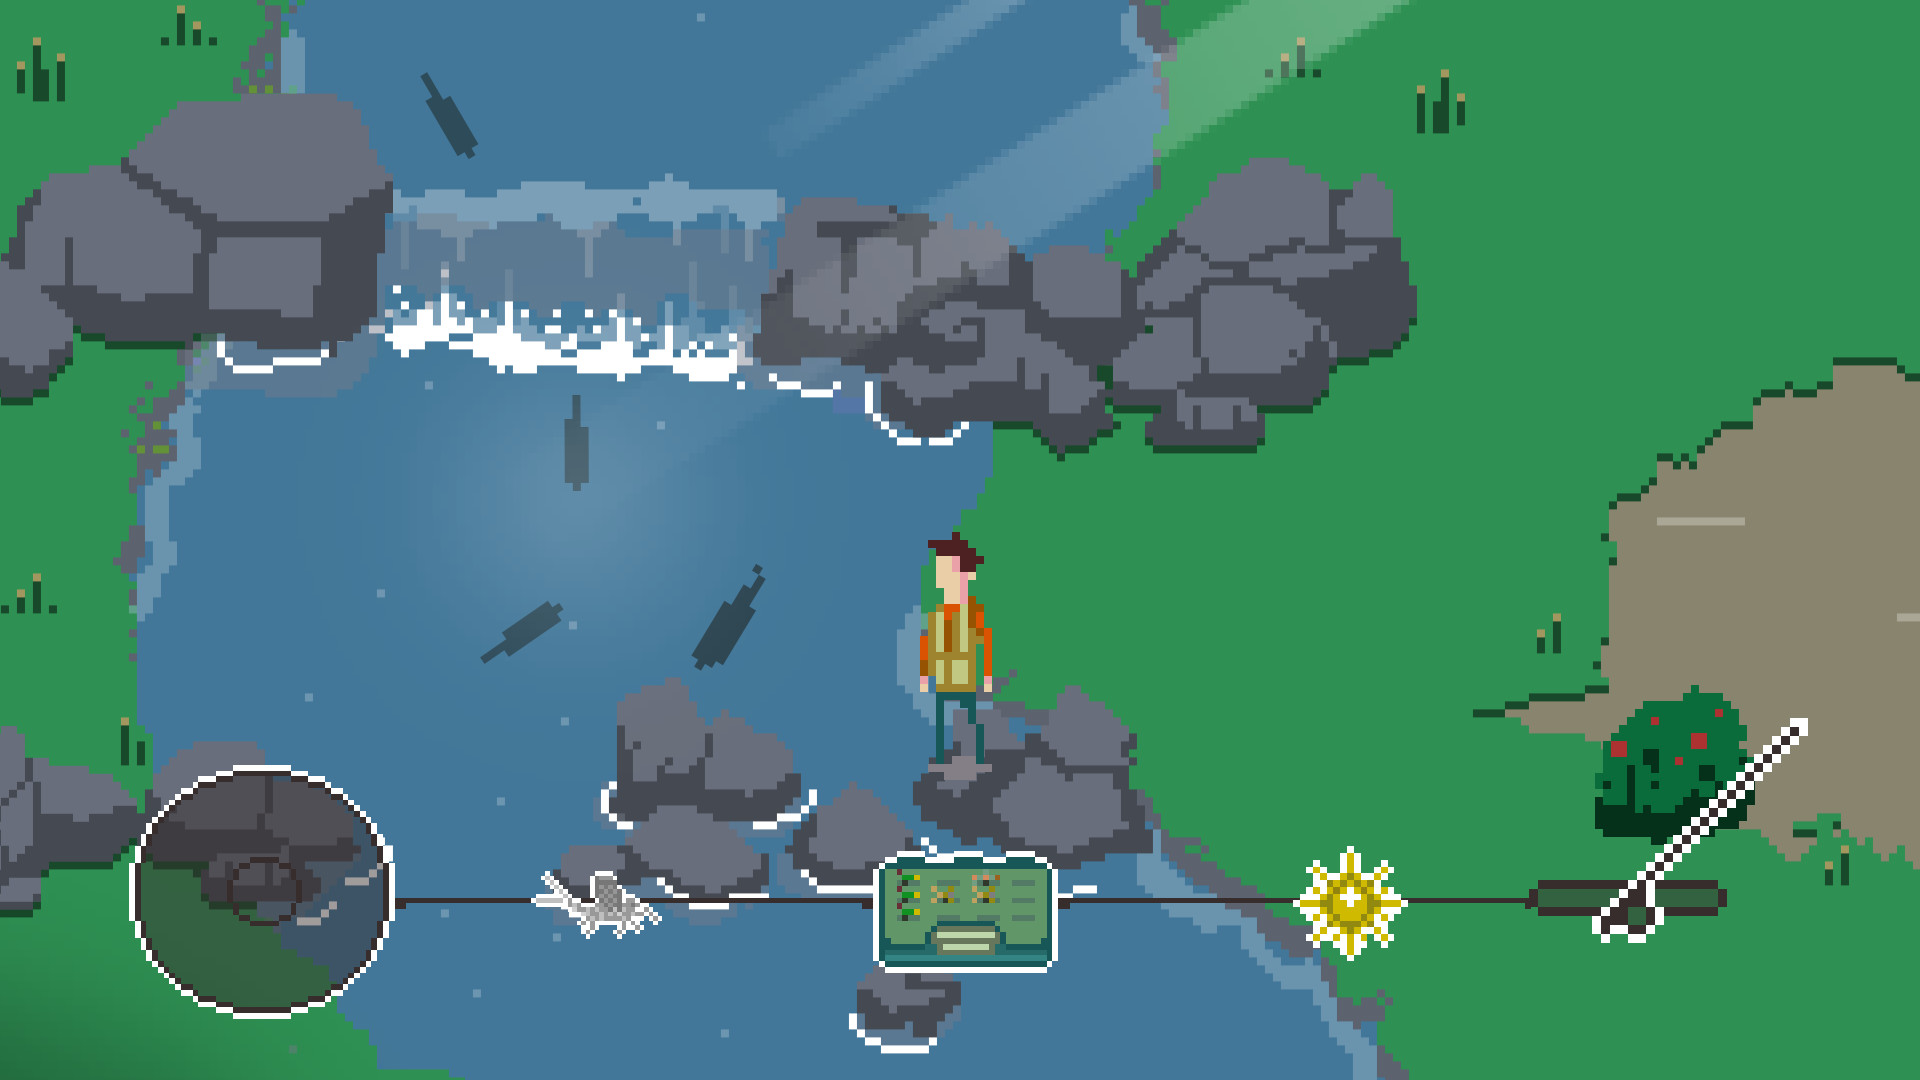 River Legends: A Fly Fishing Adventure Free Download